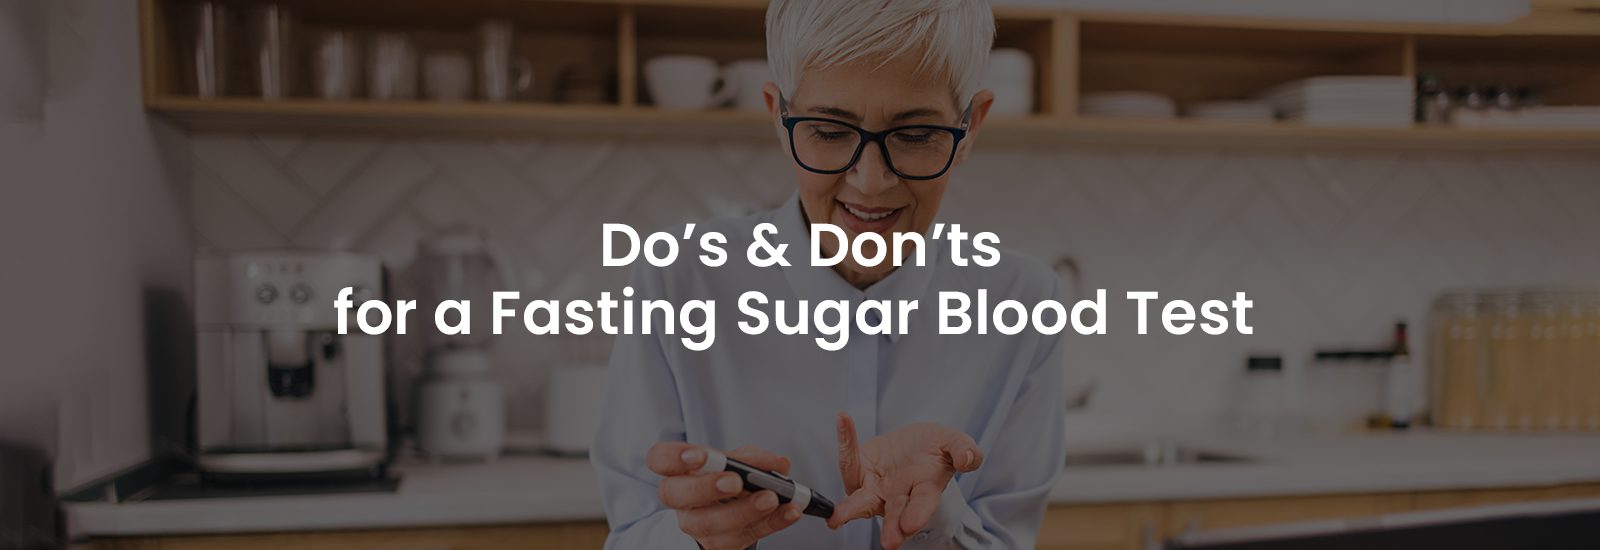 Do’s & Don’ts for a Fasting Sugar Blood Test